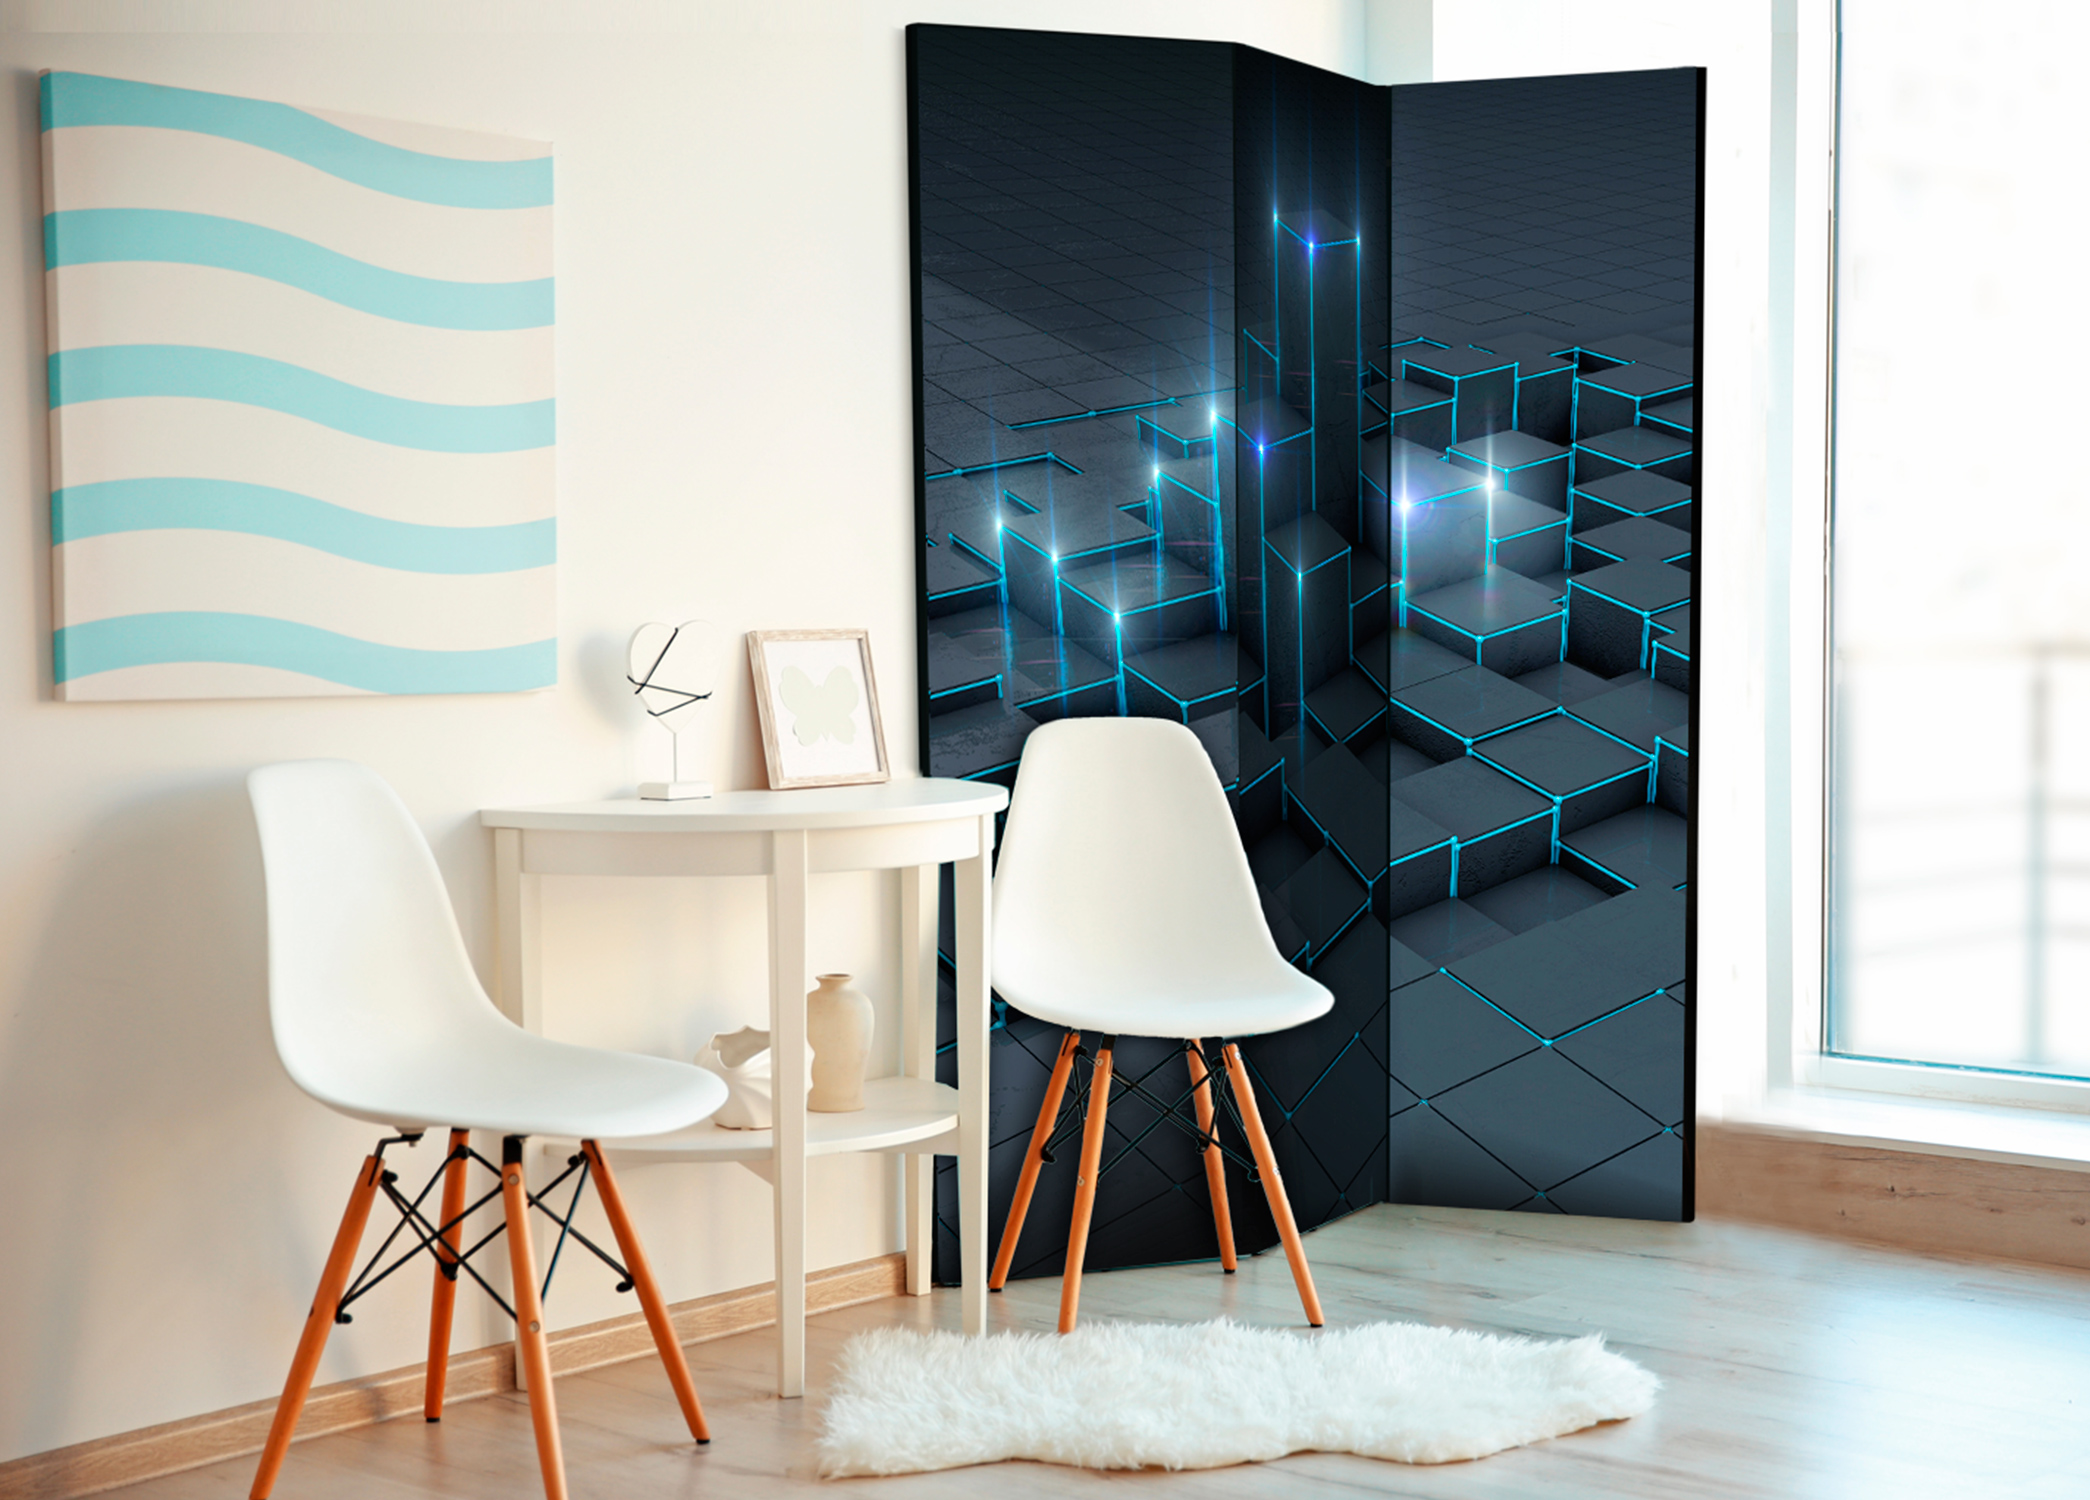 show original title Details about   Decorative Folding Screen room divider partition Spanish wall privacy f-C-0243-z-c 